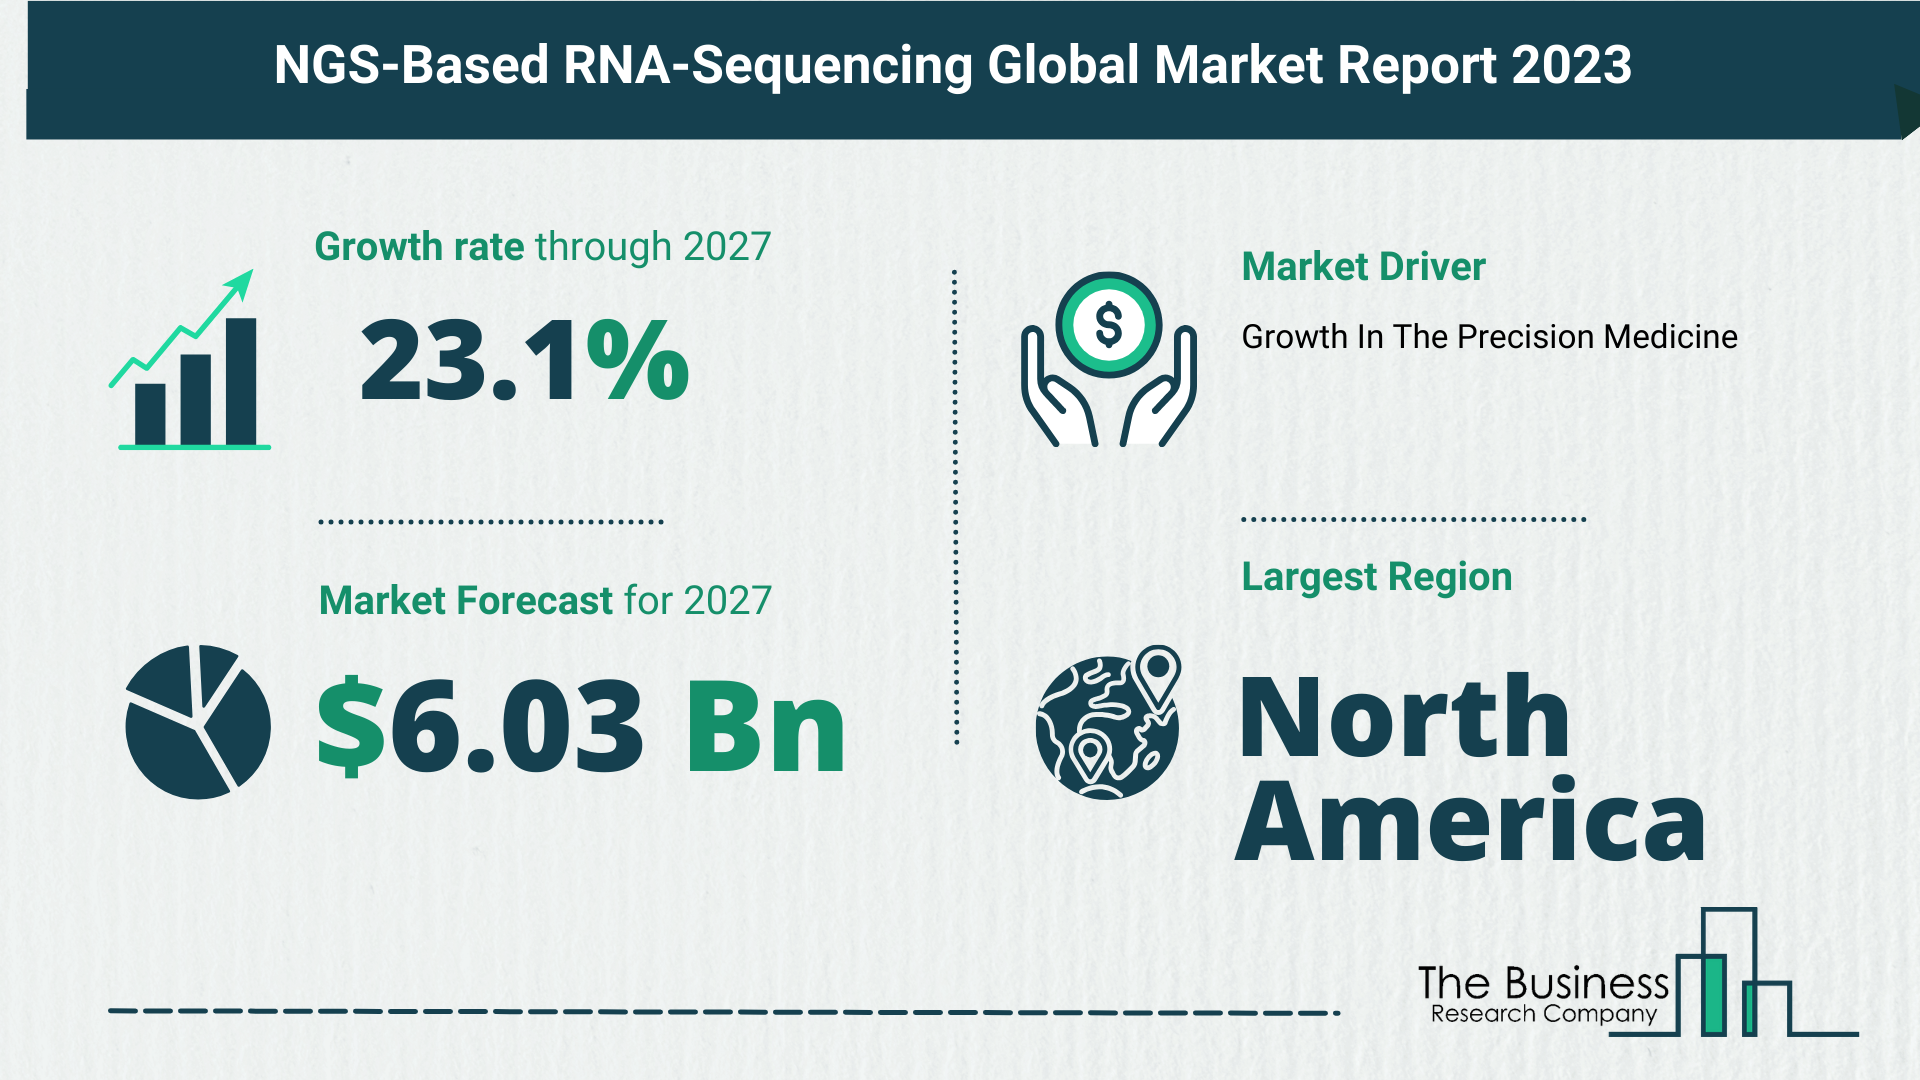 NGS-Based RNA-Sequencing Market Overview: Market Size, Drivers And Trends